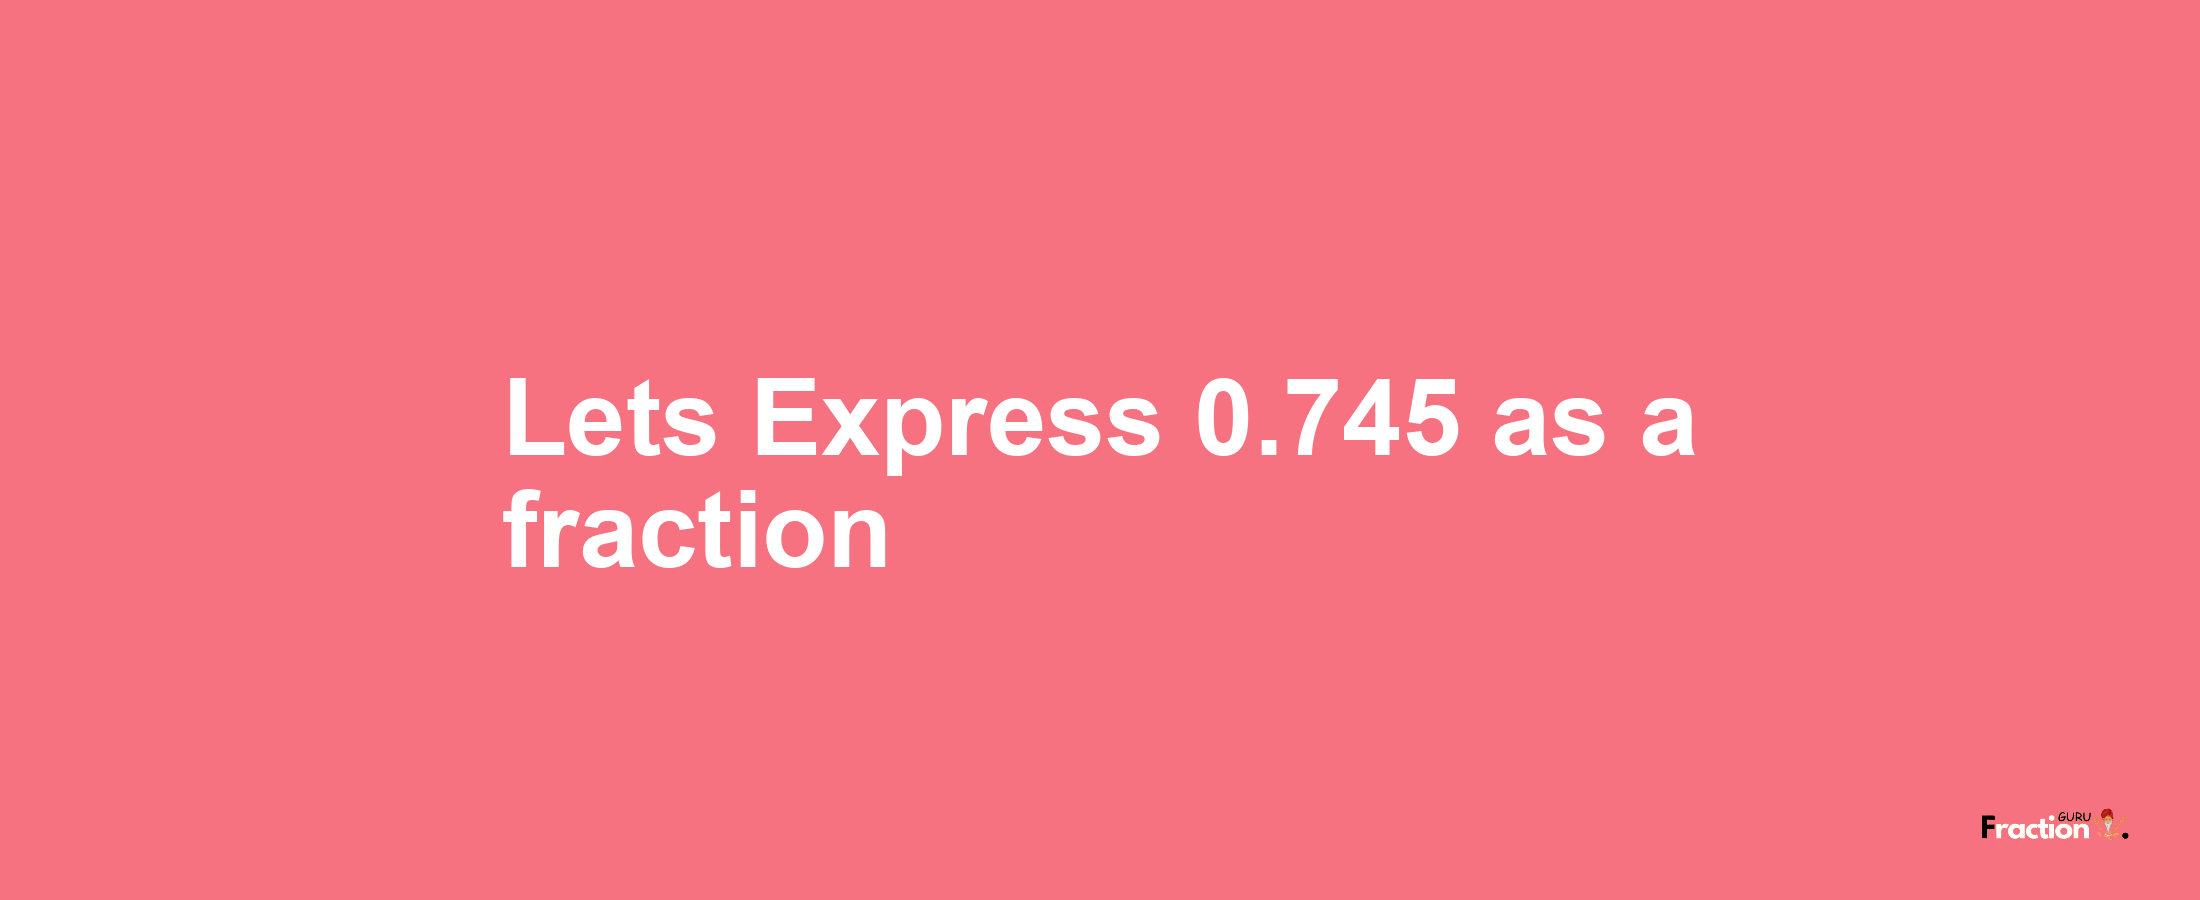 Lets Express 0.745 as afraction